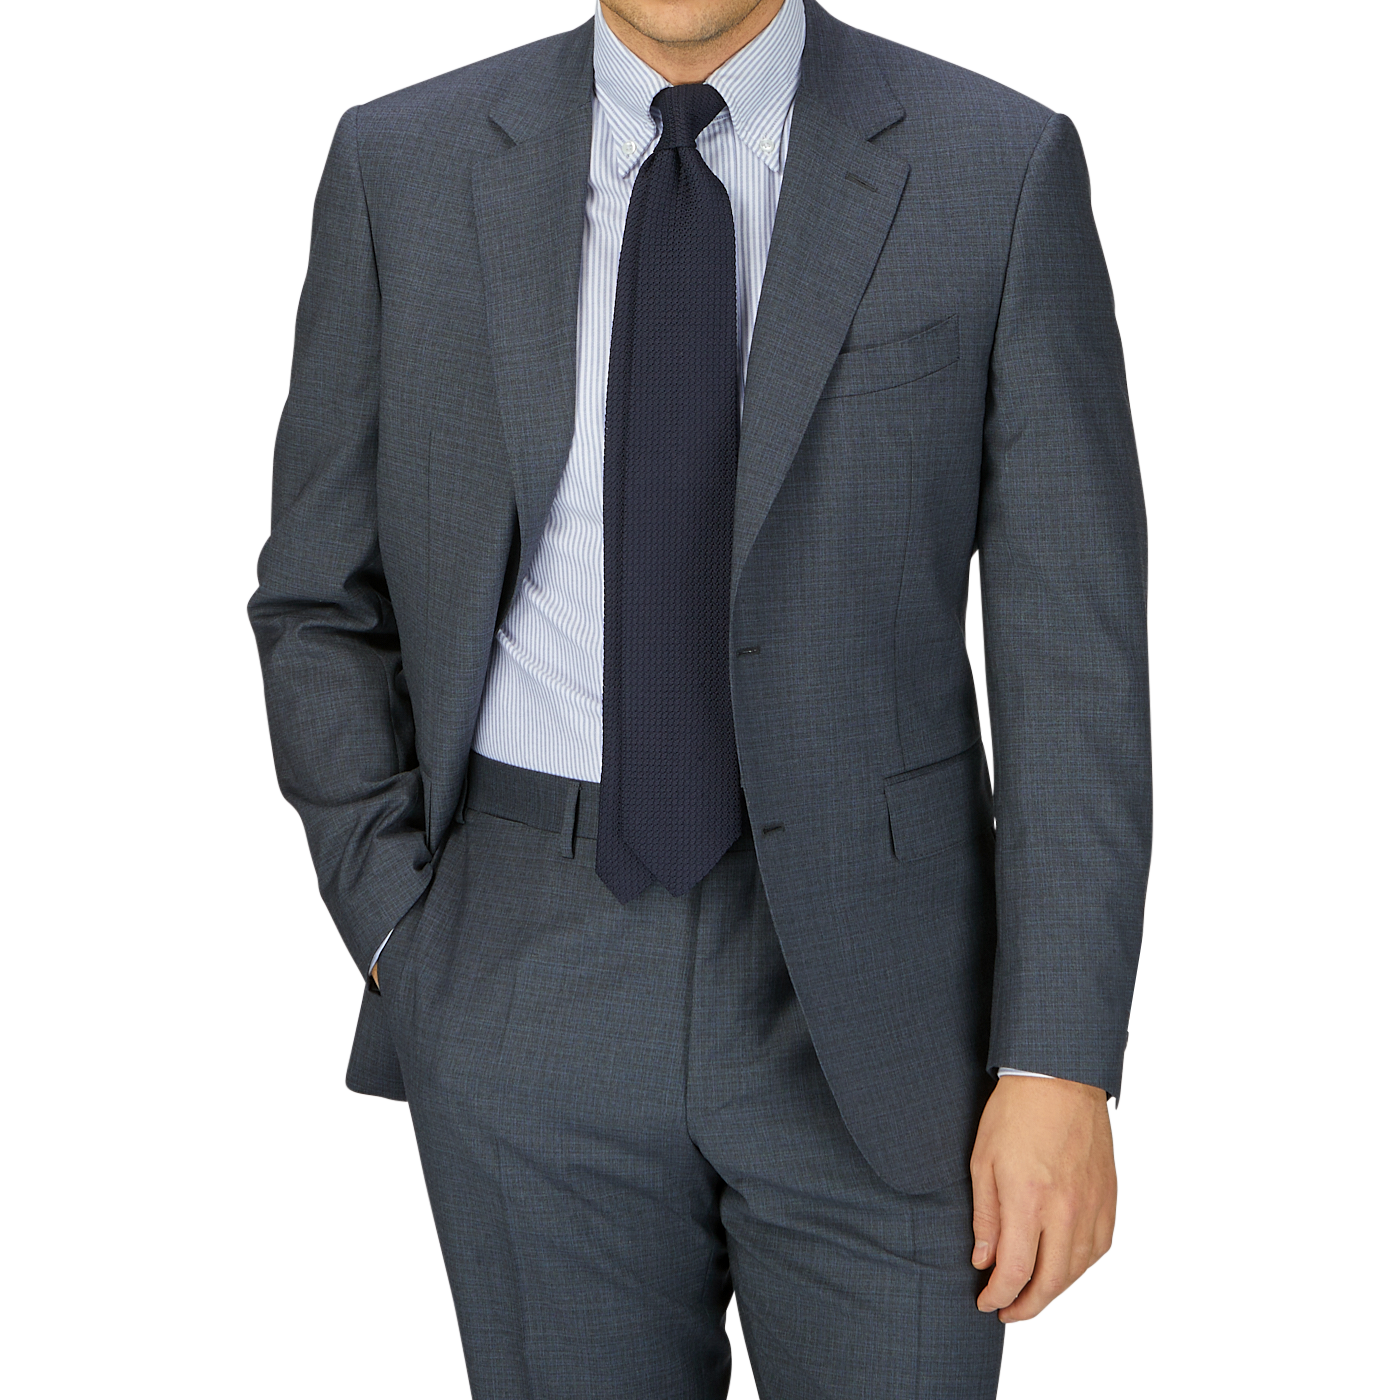 A man in a tailored Canali Grey-Blue Melange Wool Suit with a blue tie and striped shirt, posing with one hand in his pocket against a gray background.